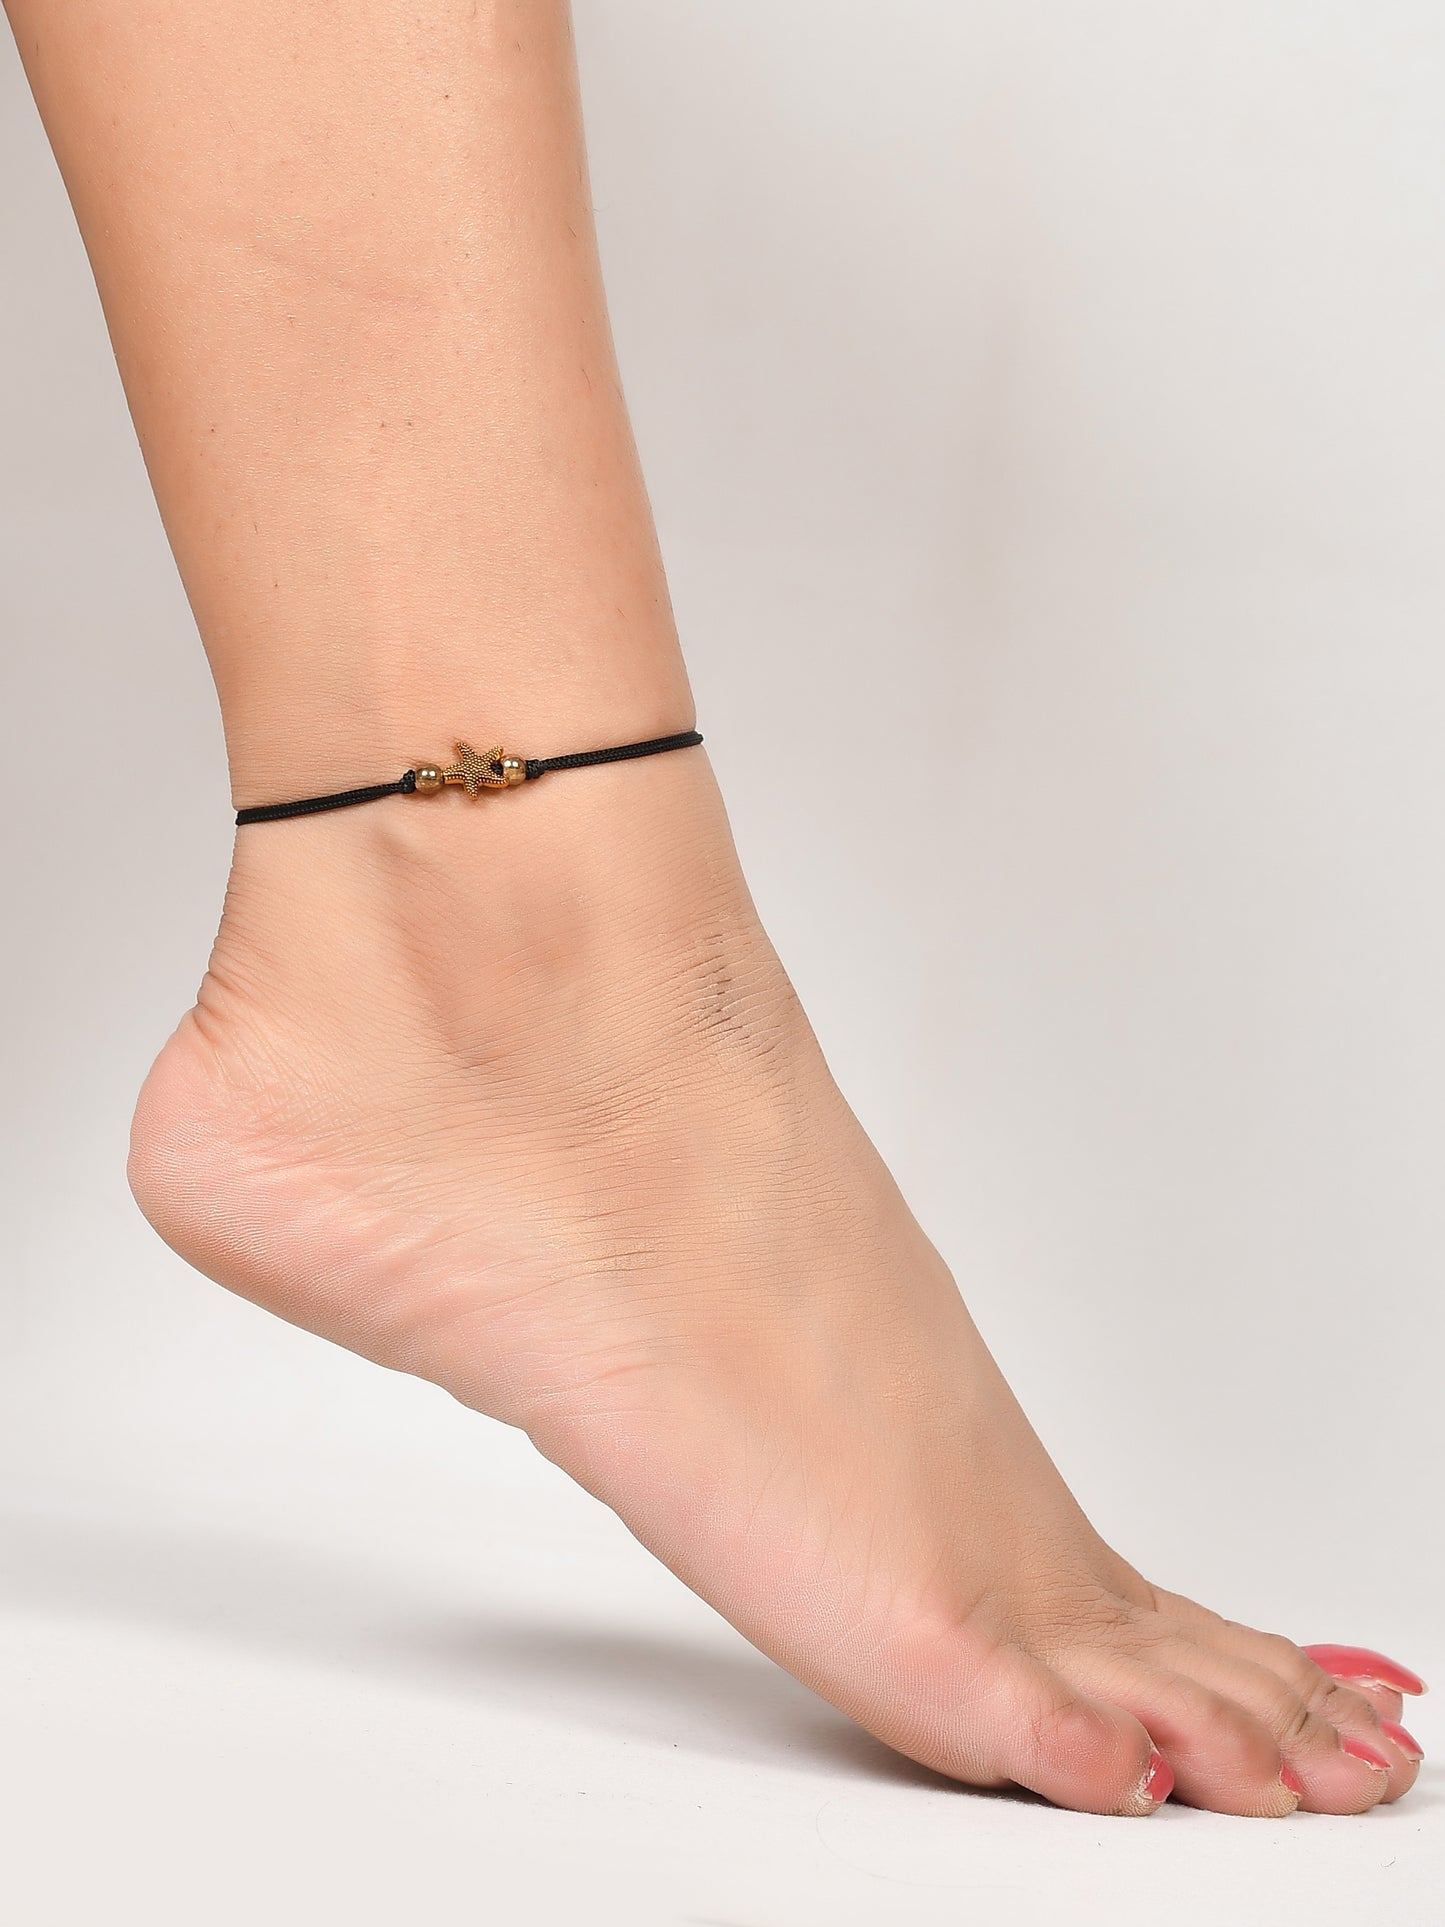 Oxidized Gold Star Fish Charm Bead Anklet